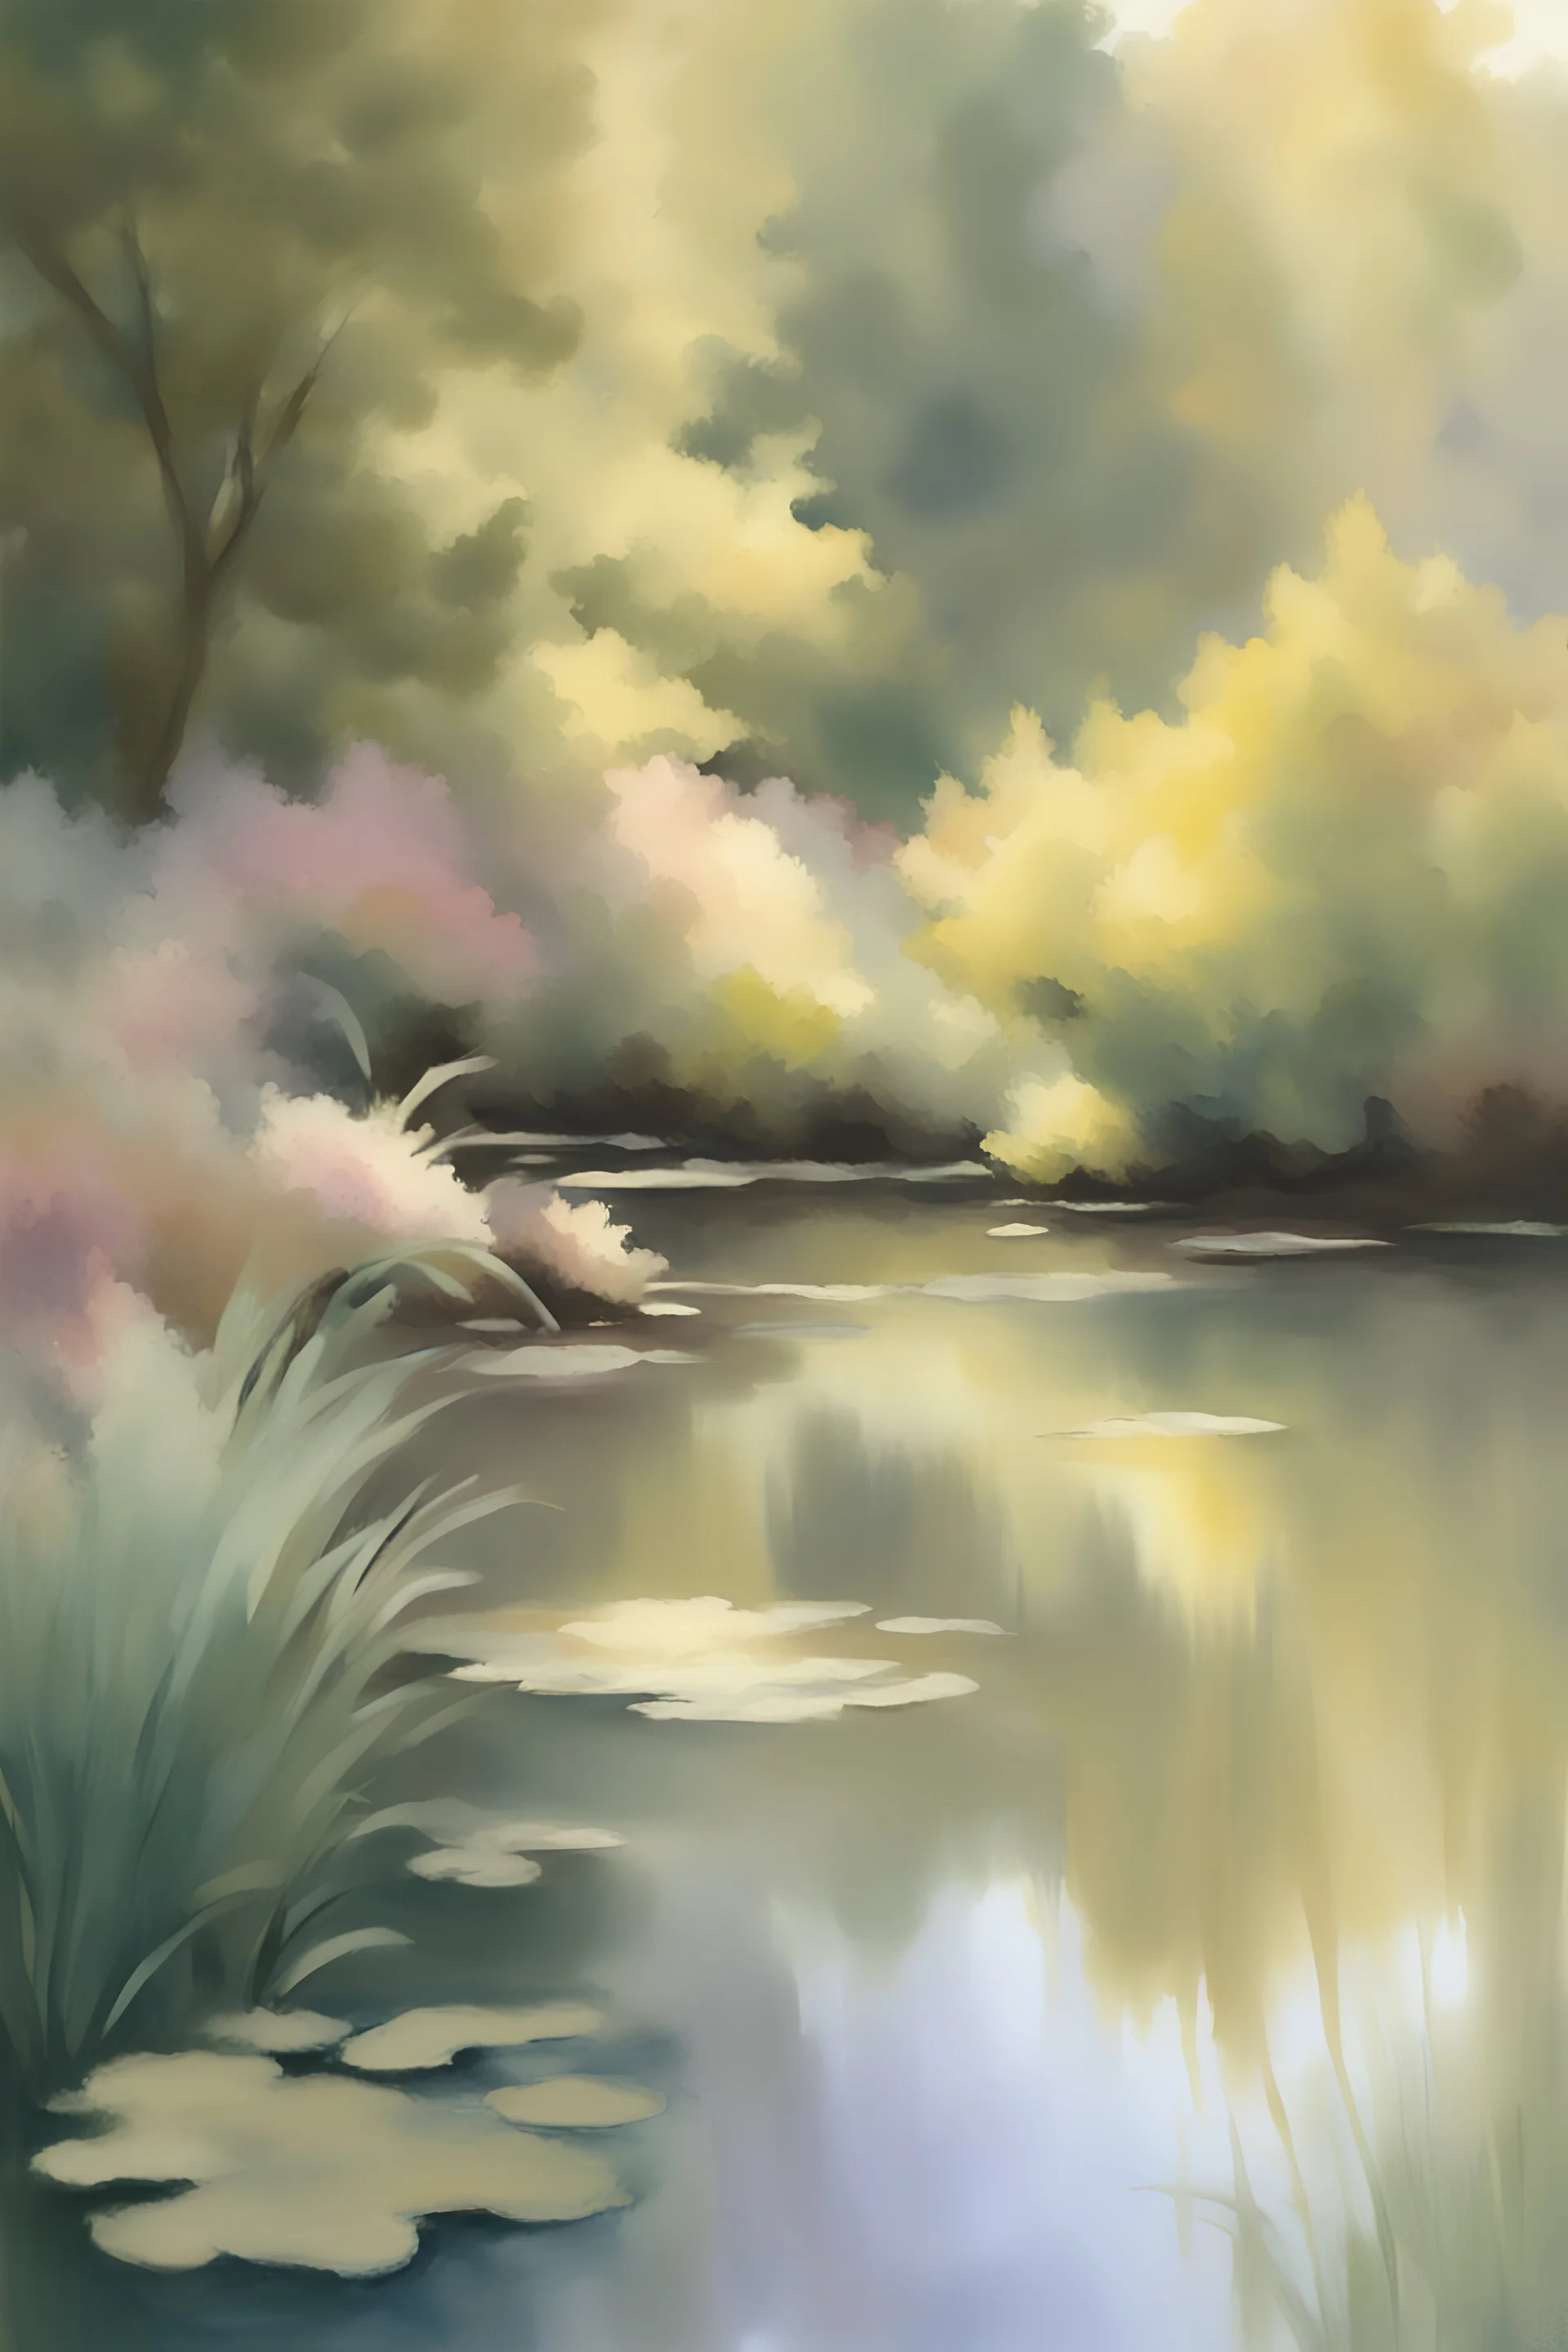 Generate an impressionist-style watercolor oil painting of a tranquil pond. Use brushstrokes to blend colors, capture the play of light and color, and put in a warm glow of dappled sunlight